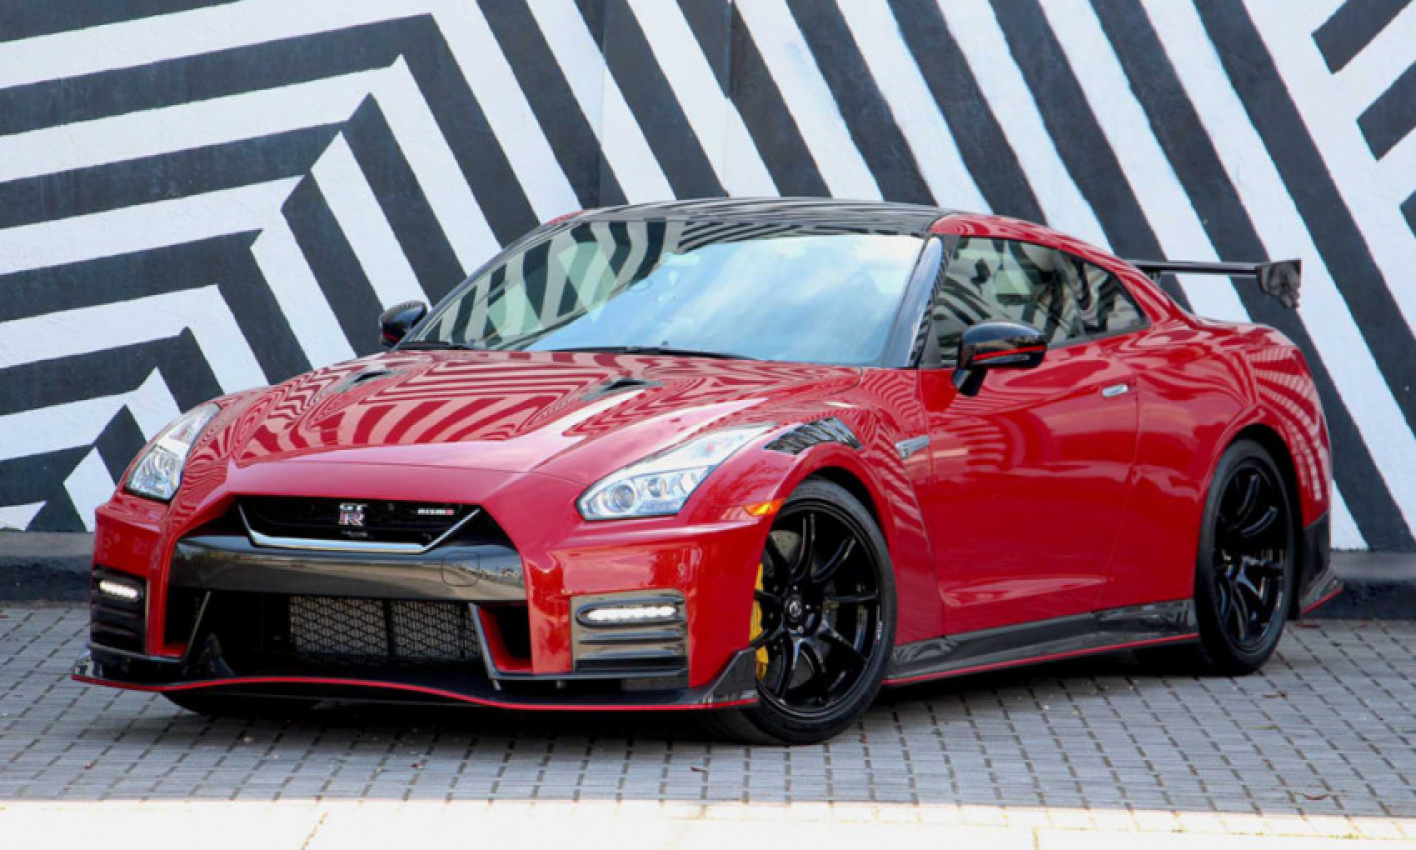 autos, cars, industry news, nissan, emissions, emissions control, gt-r, industry news, nismo, nissan gt-r, nissan gt-r r35, nissan gt-r r36, nissan motorsport, r36, emissions regulations slay nissan gt-r in europe